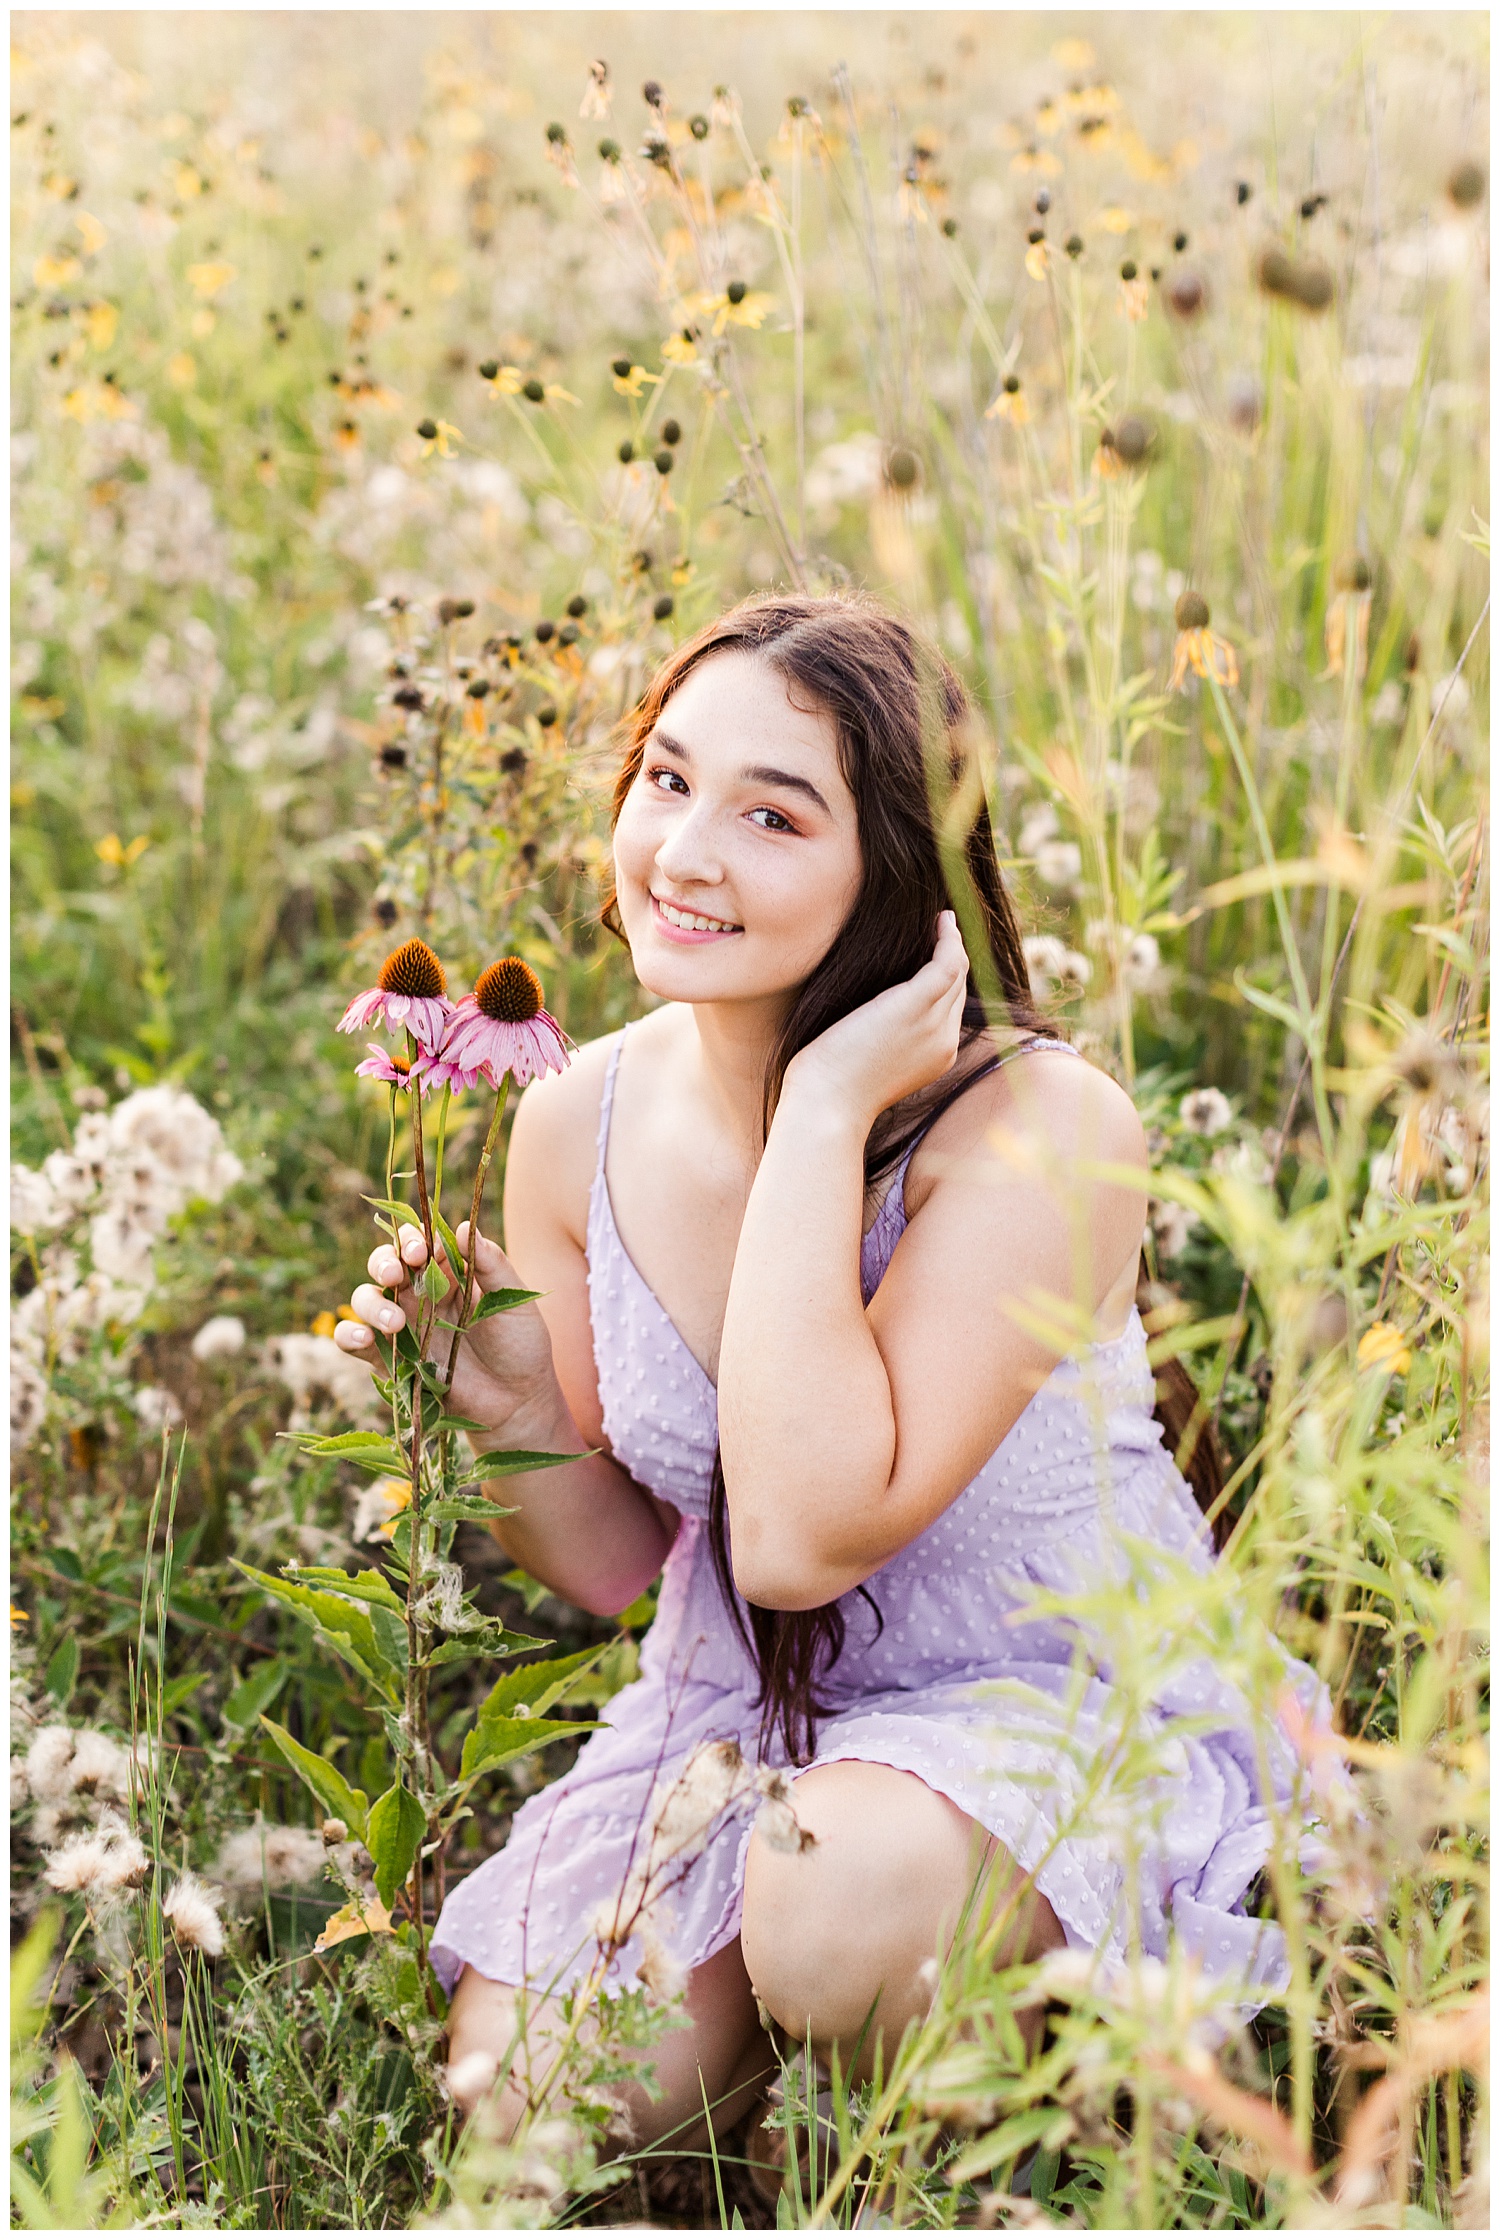 Laney, wearing a lilac dress, sits in a field of wildflowers | CB Studio